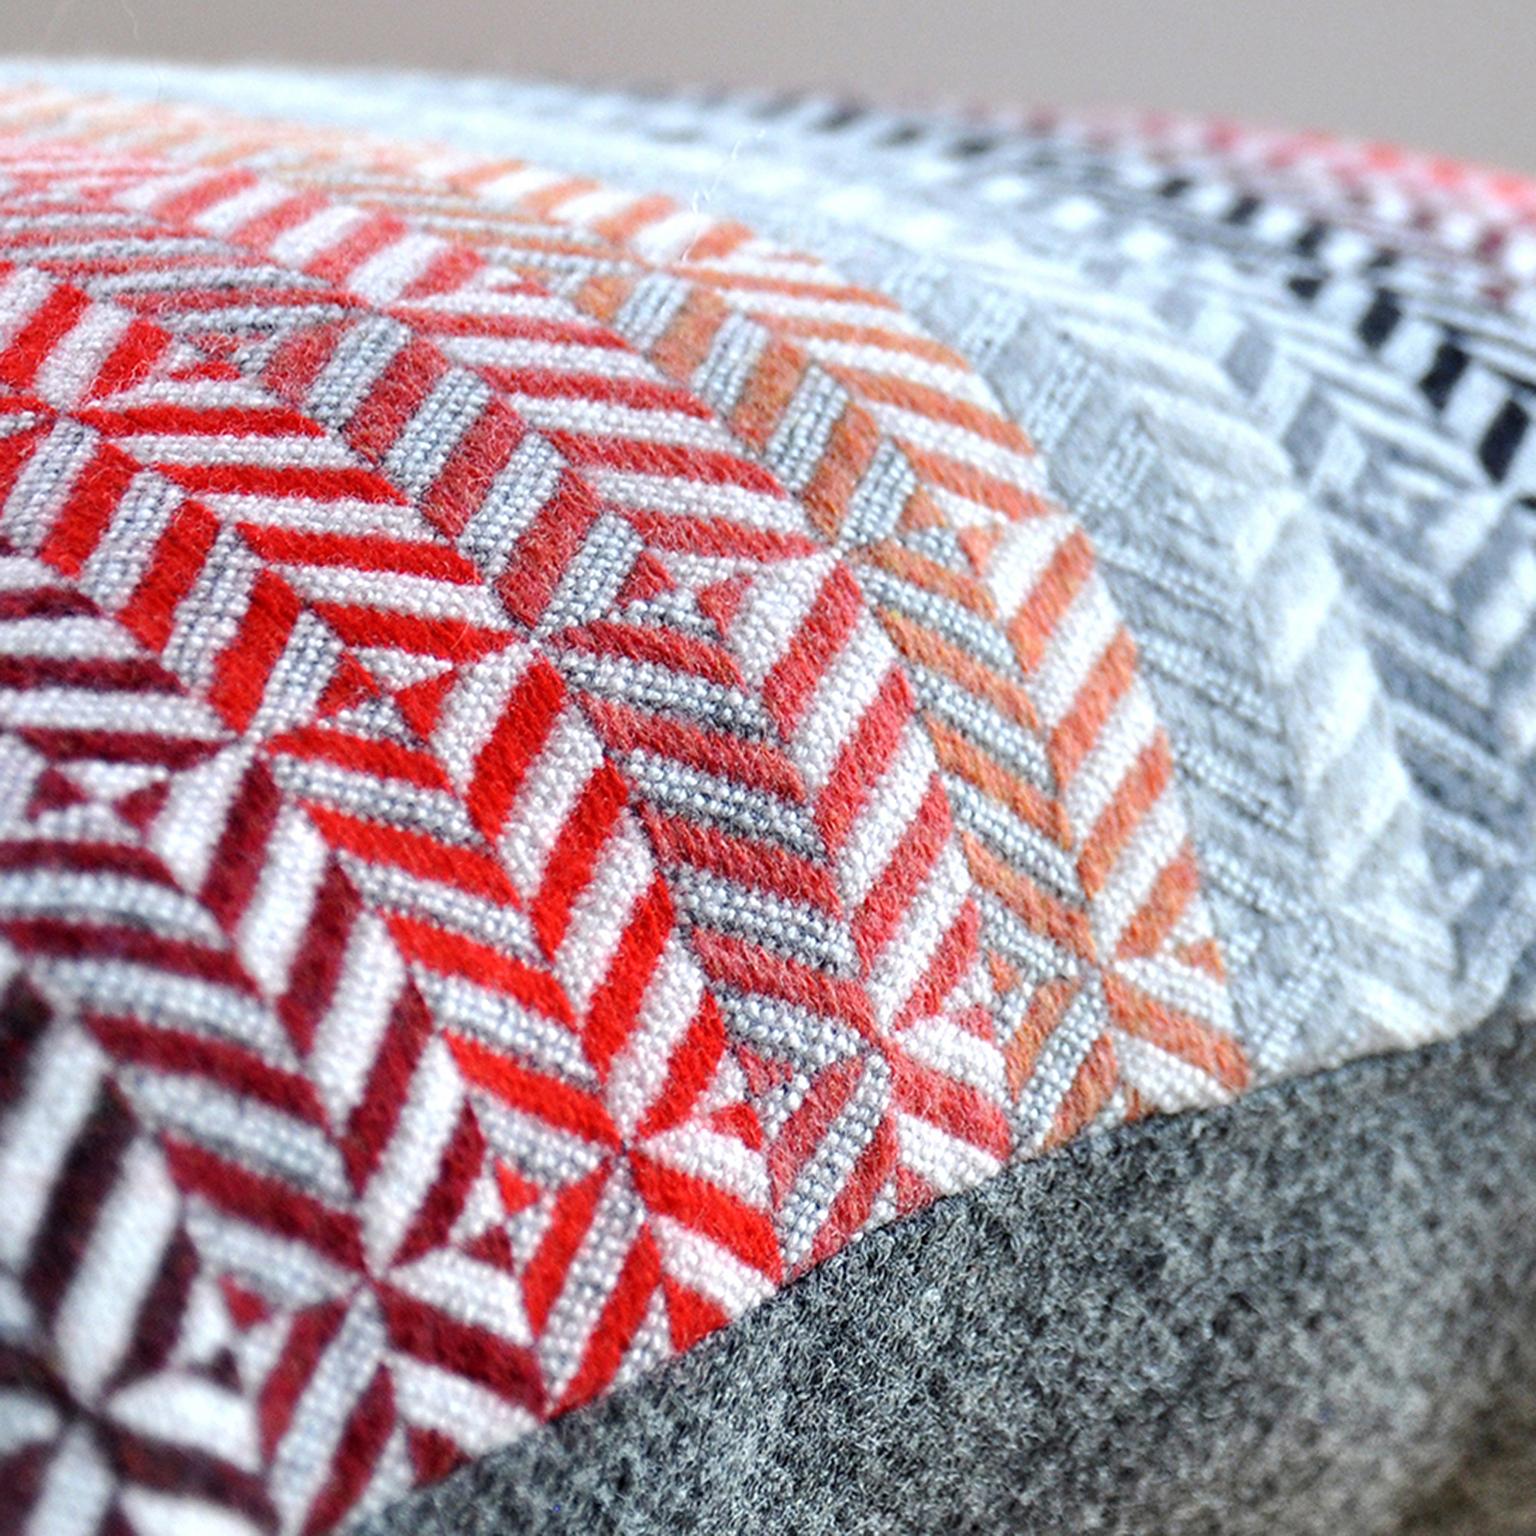 Drawing inspiration from the color and pattern found in stain glass work, the Saint Gilles cushion takes its name from an area of Brussels renowned for its Art Deco architecture.

Handwoven on a dobby loom in our studio using soft merino lambswool